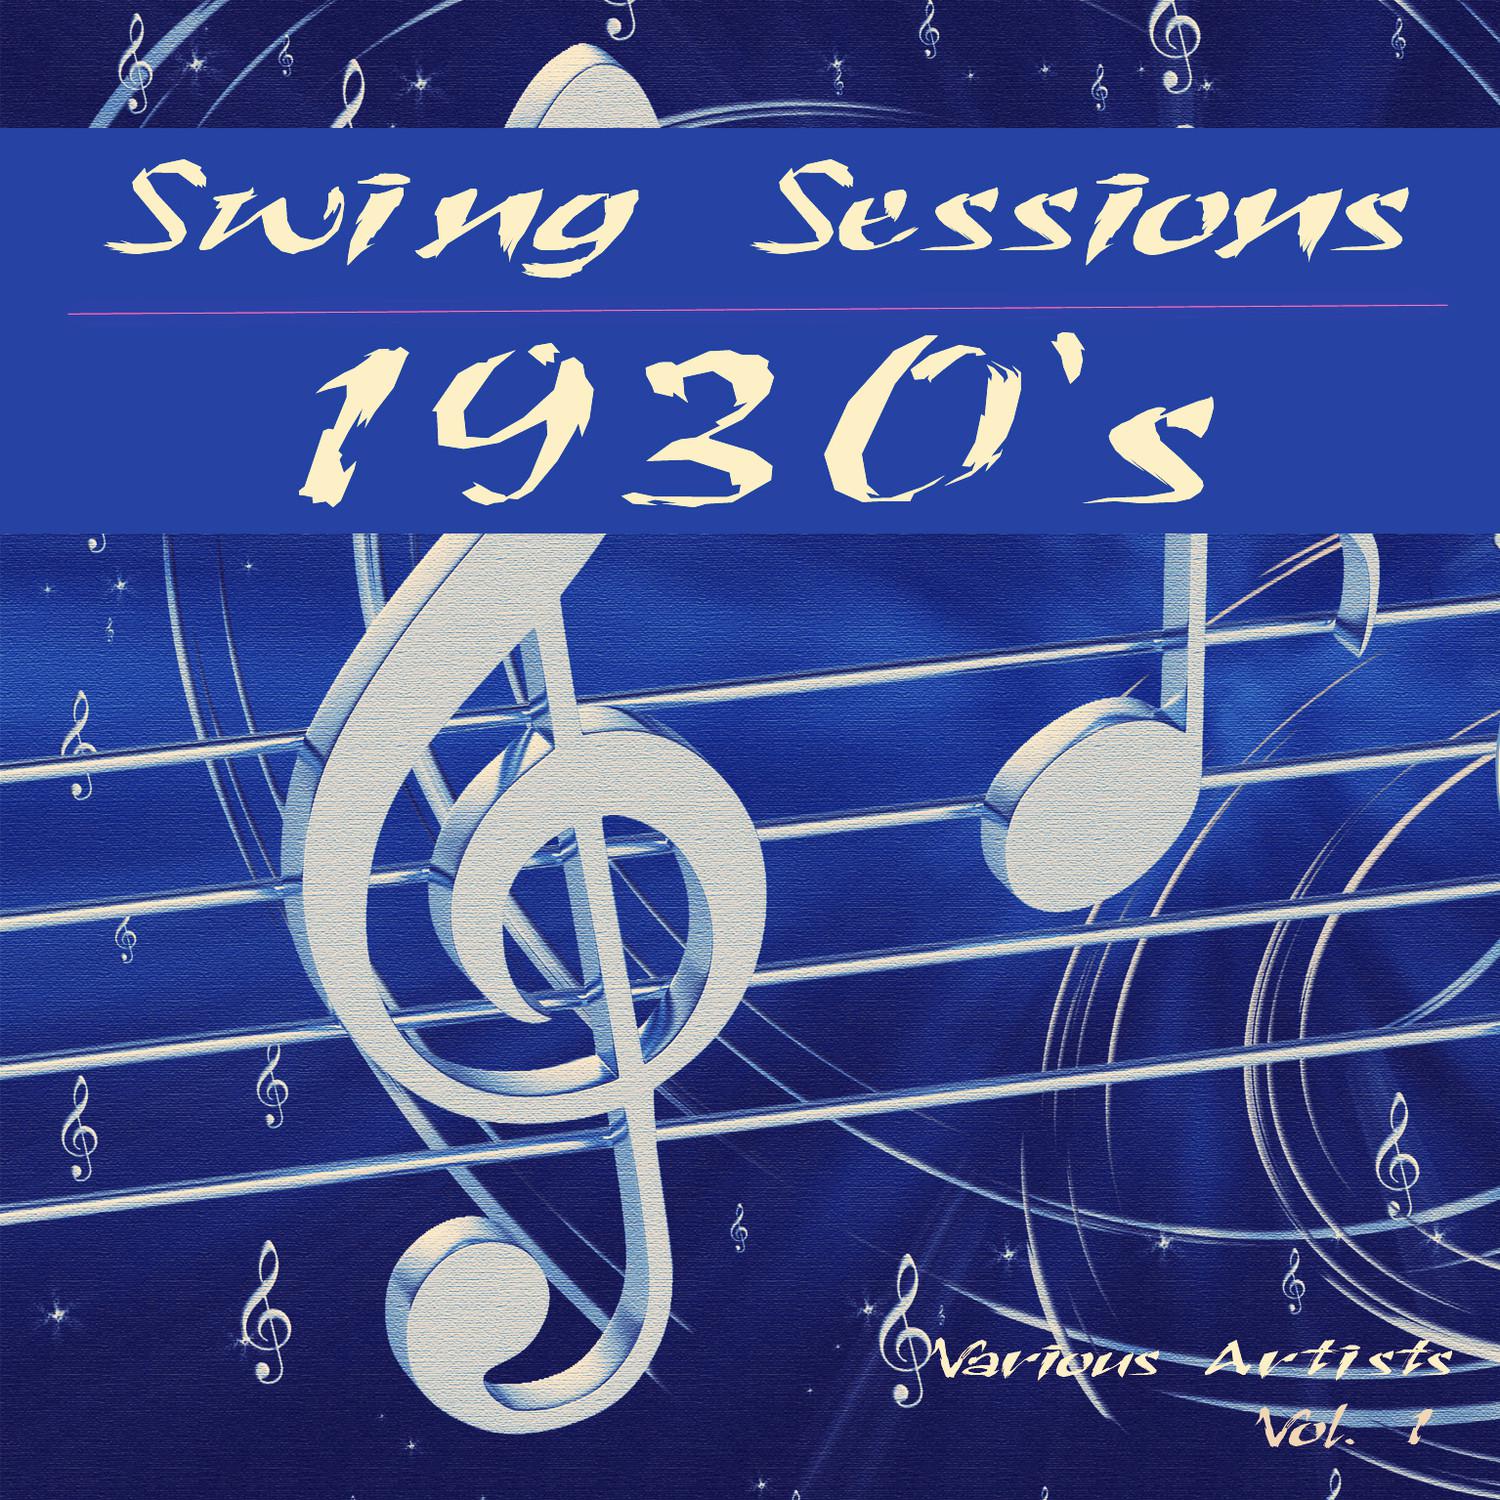 Swing Sessions - 1930`s, Vol. 1